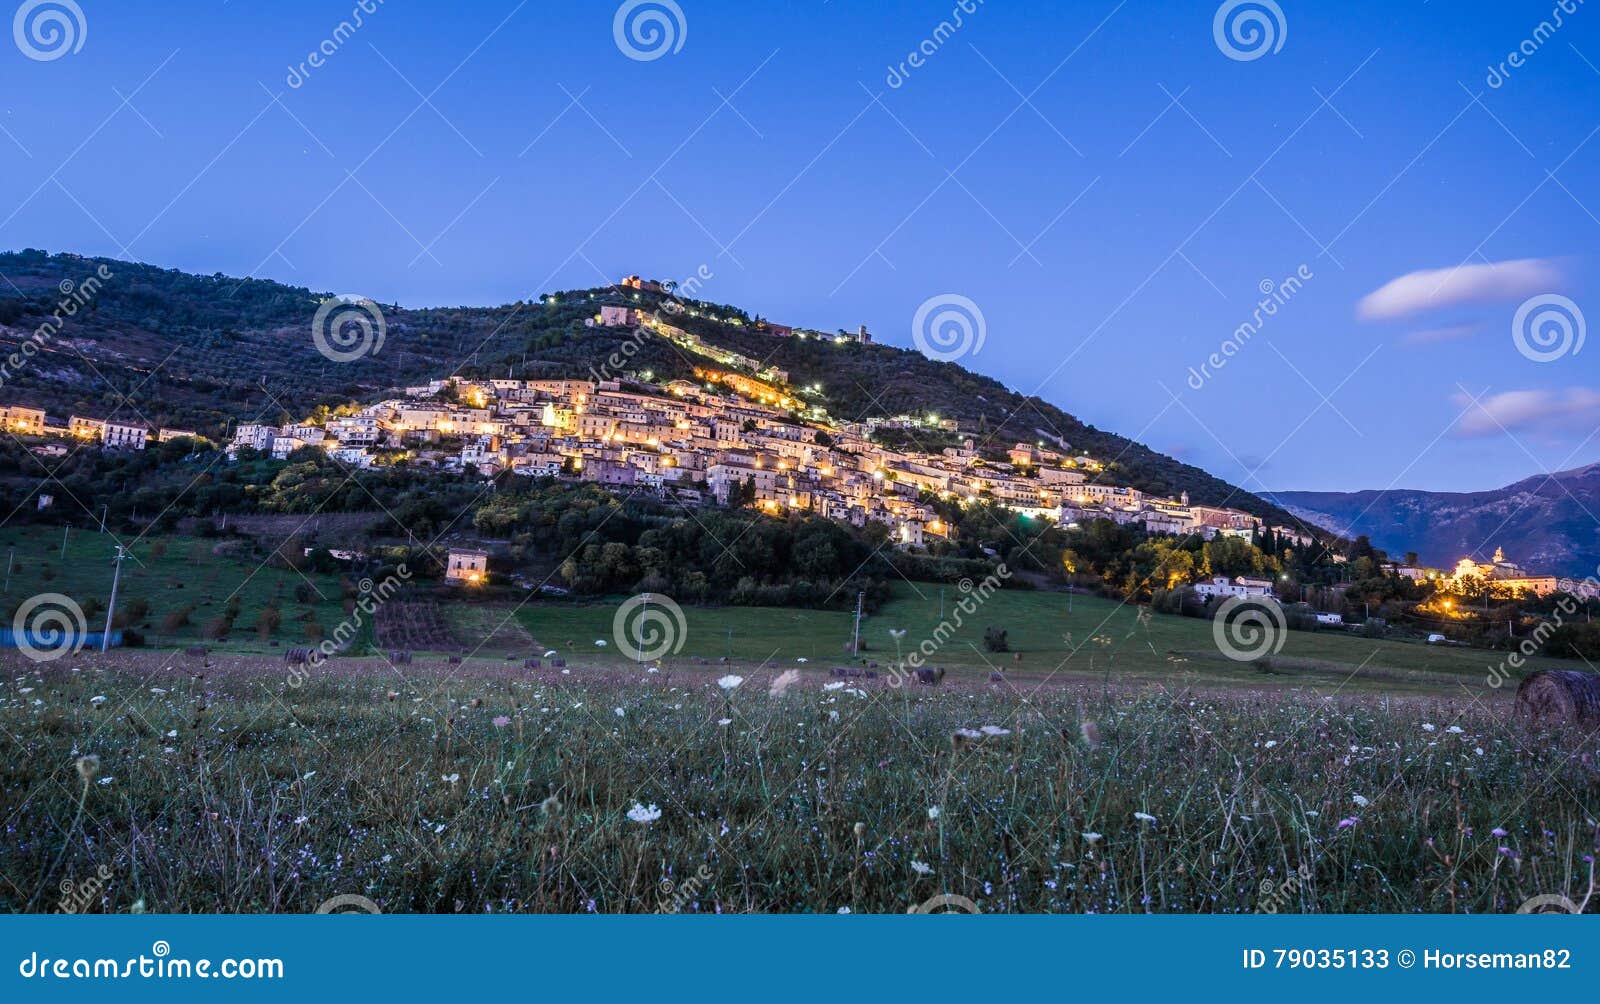 view of alvito, ciociaria, by night from the valley